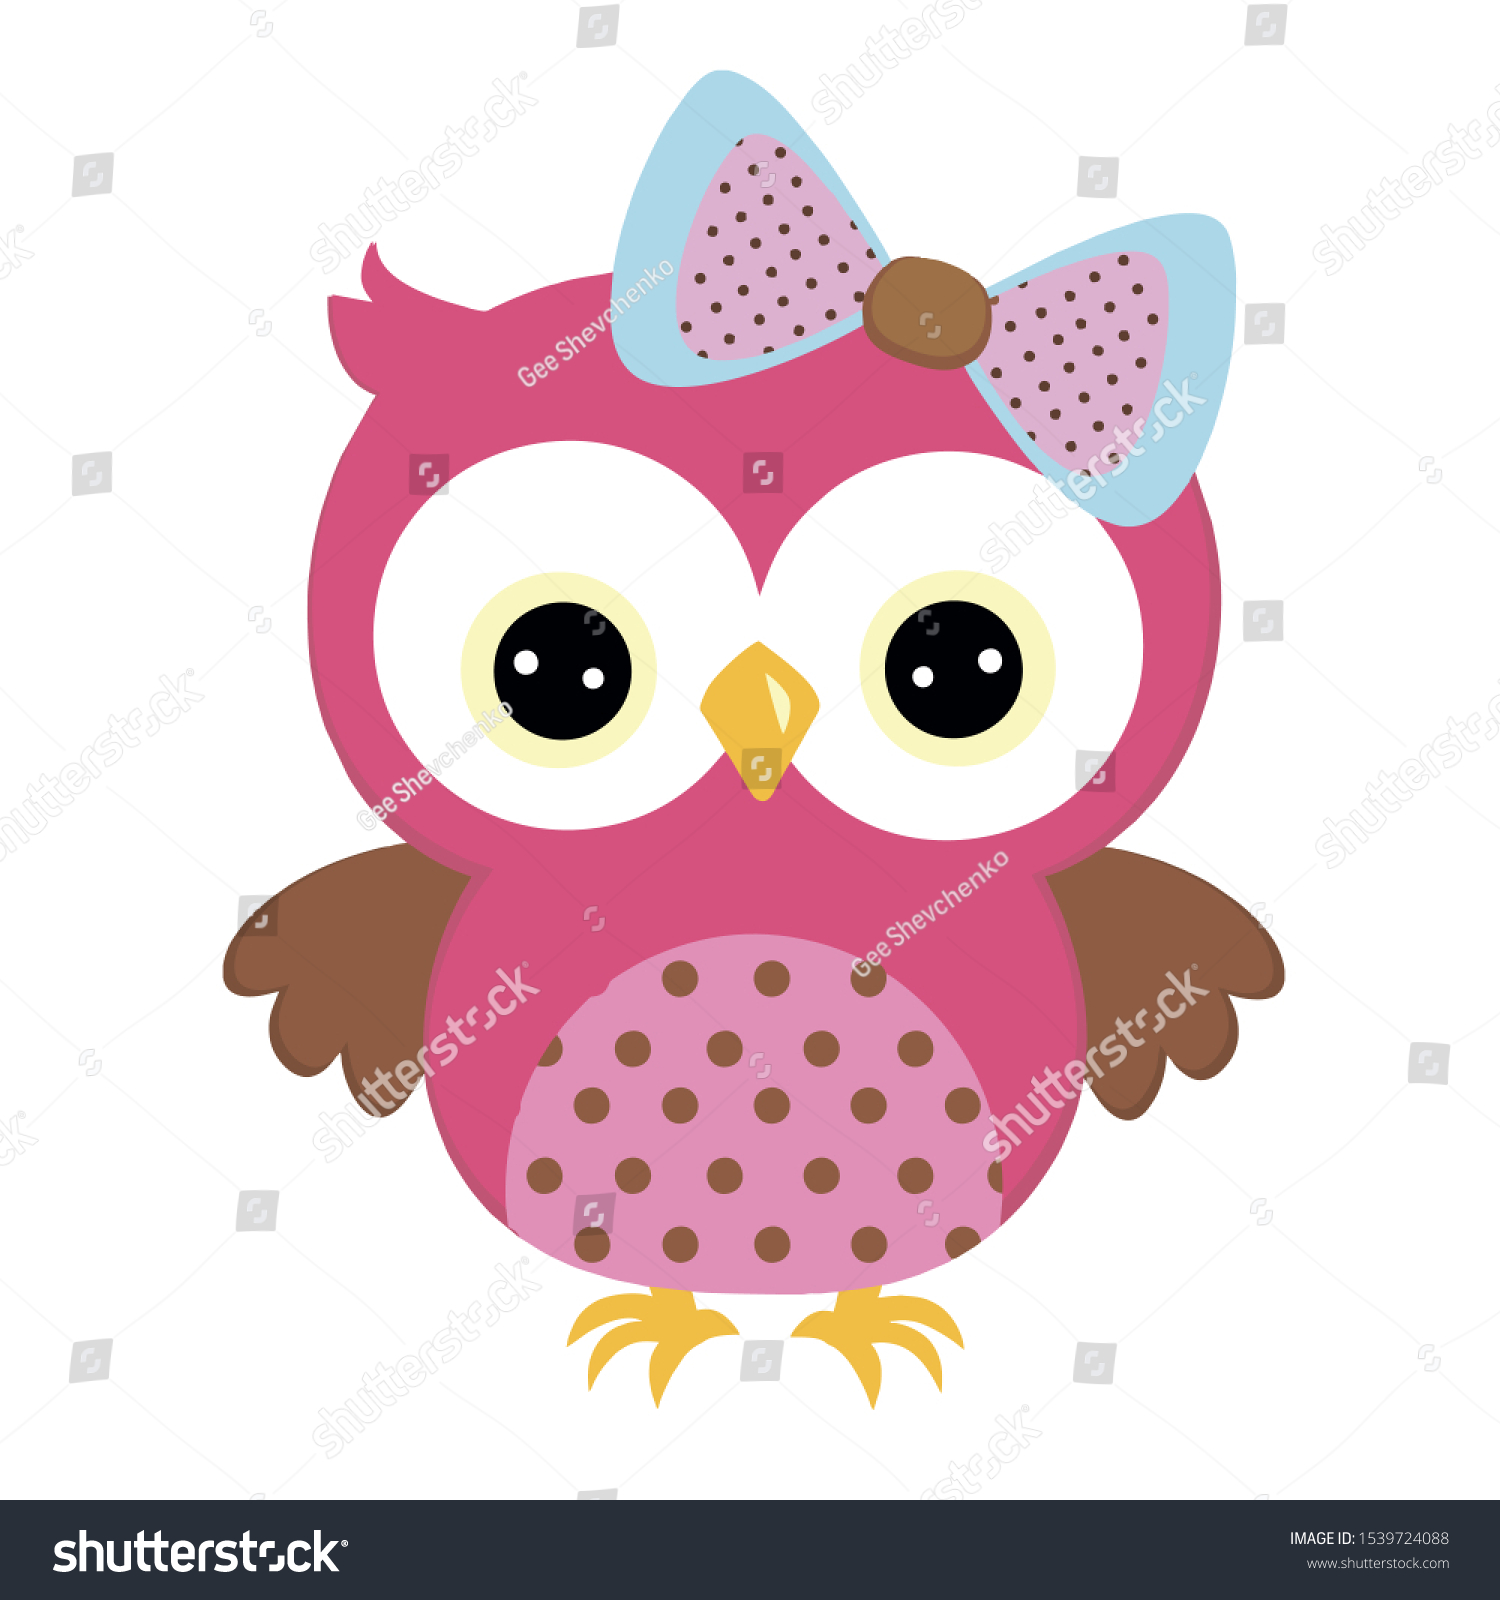 Owl Vector Owl Kids Party Owl Stock Vector (Royalty Free) 1539724088